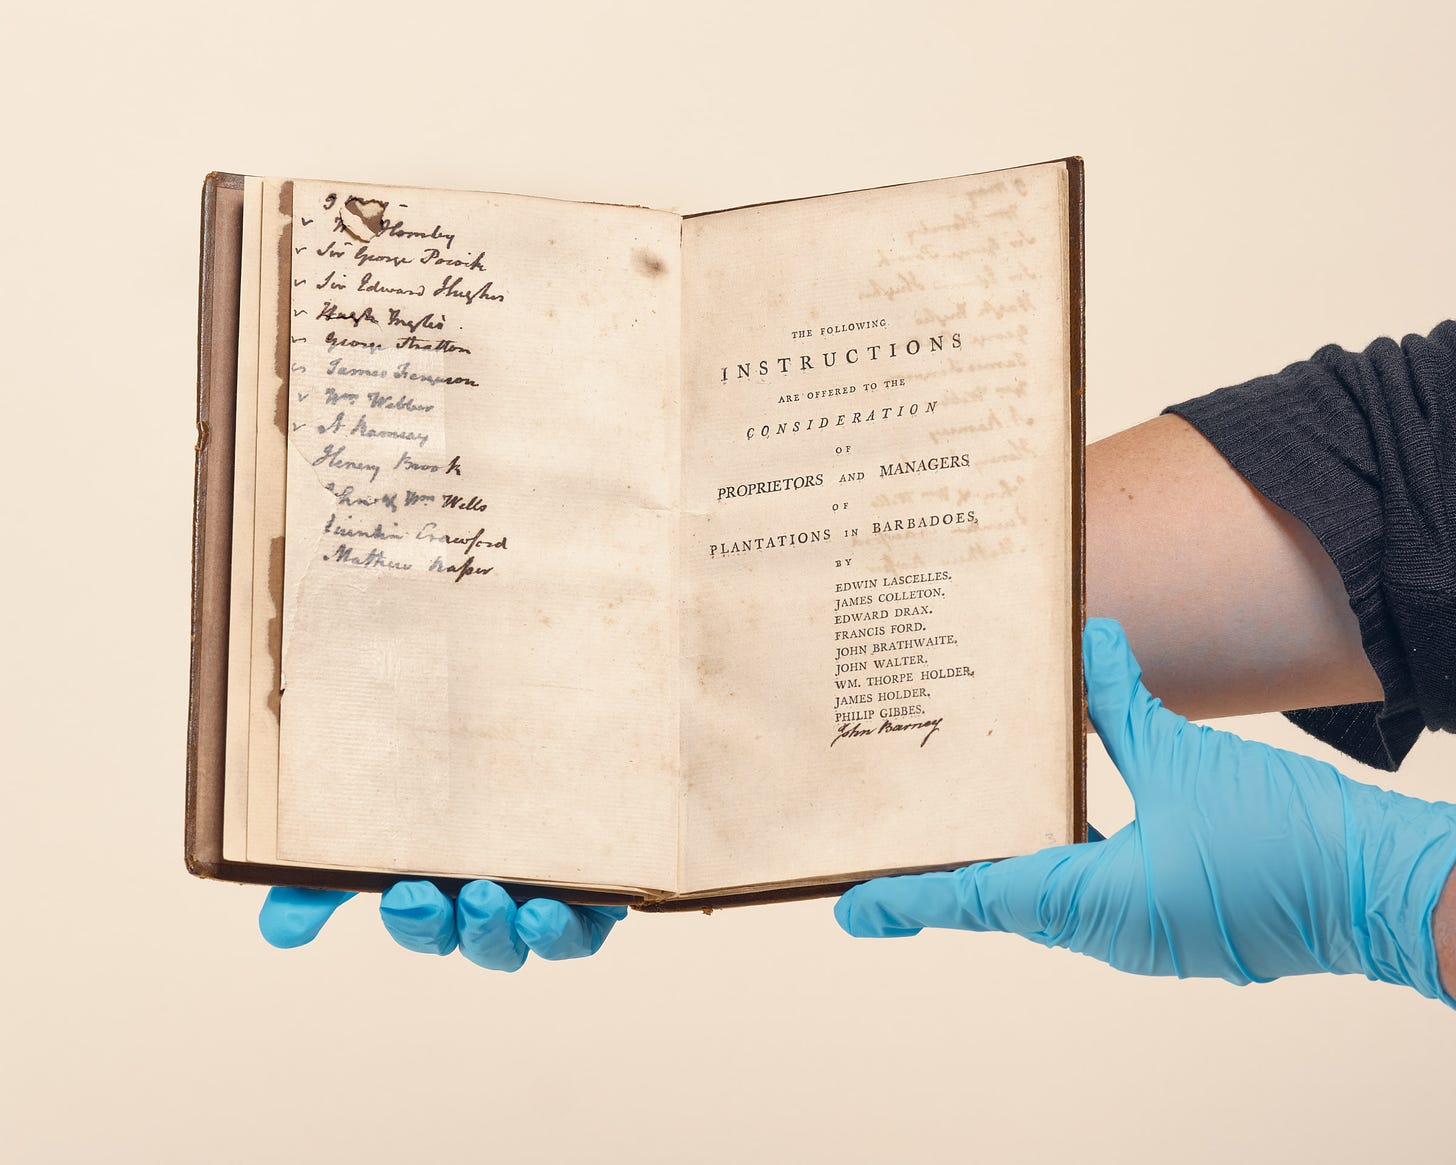 The 18th century book known as “The Instructions,” co-authored by Edward Drax, Edwin Lascelles, and others, at the Barbados Historical Society. (Christopher Gregory-Rivera for TIME)